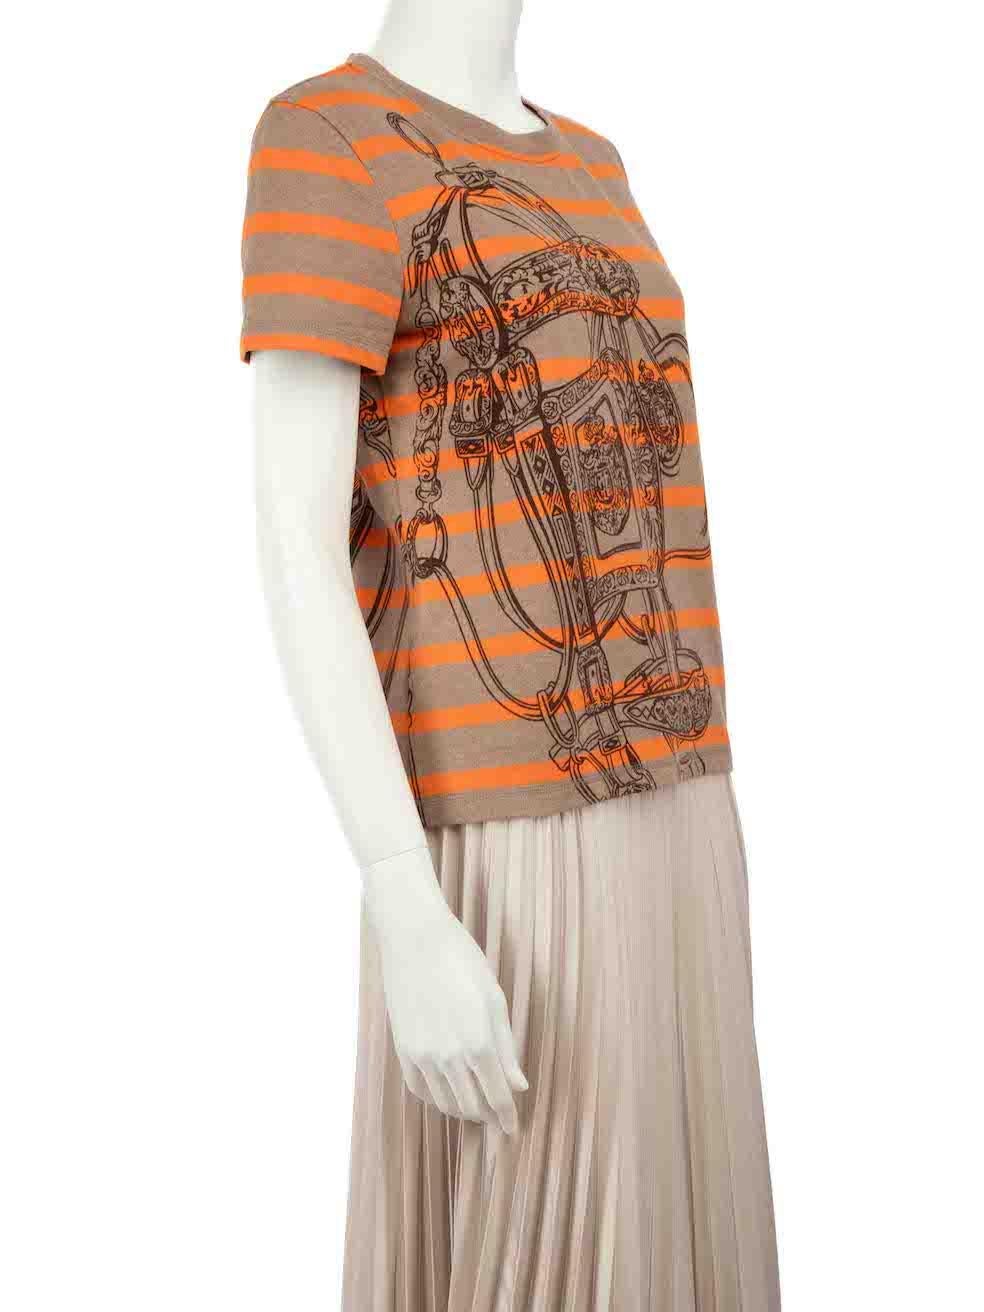 CONDITION is Never worn. No visible wear to top is evident on this new Hermès designer resale item.
 
 
 
 Details
 
 
 Brown
 
 Cotton
 
 T-shirt
 
 Orange striped pattern
 
 Bridle print
 
 Round neck
 
 
 
 
 
 Made in France
 
 
 
 Composition
